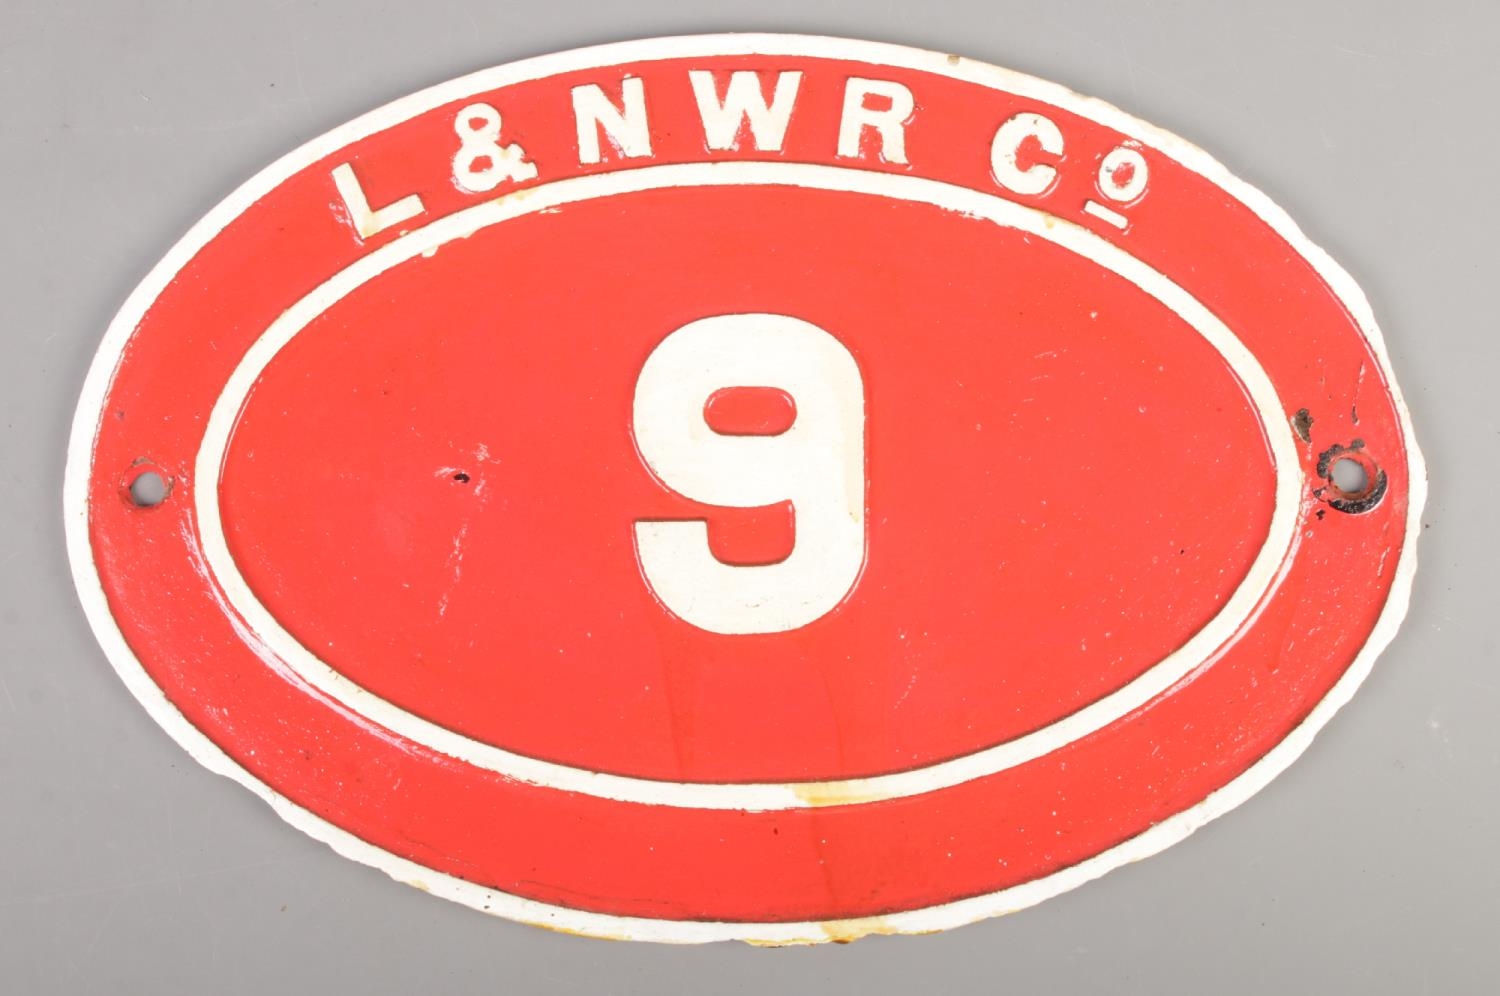 A cast iron London and North Western Railway bridge plate, No. 9. Height: 30cm, Width: 45cm. Has